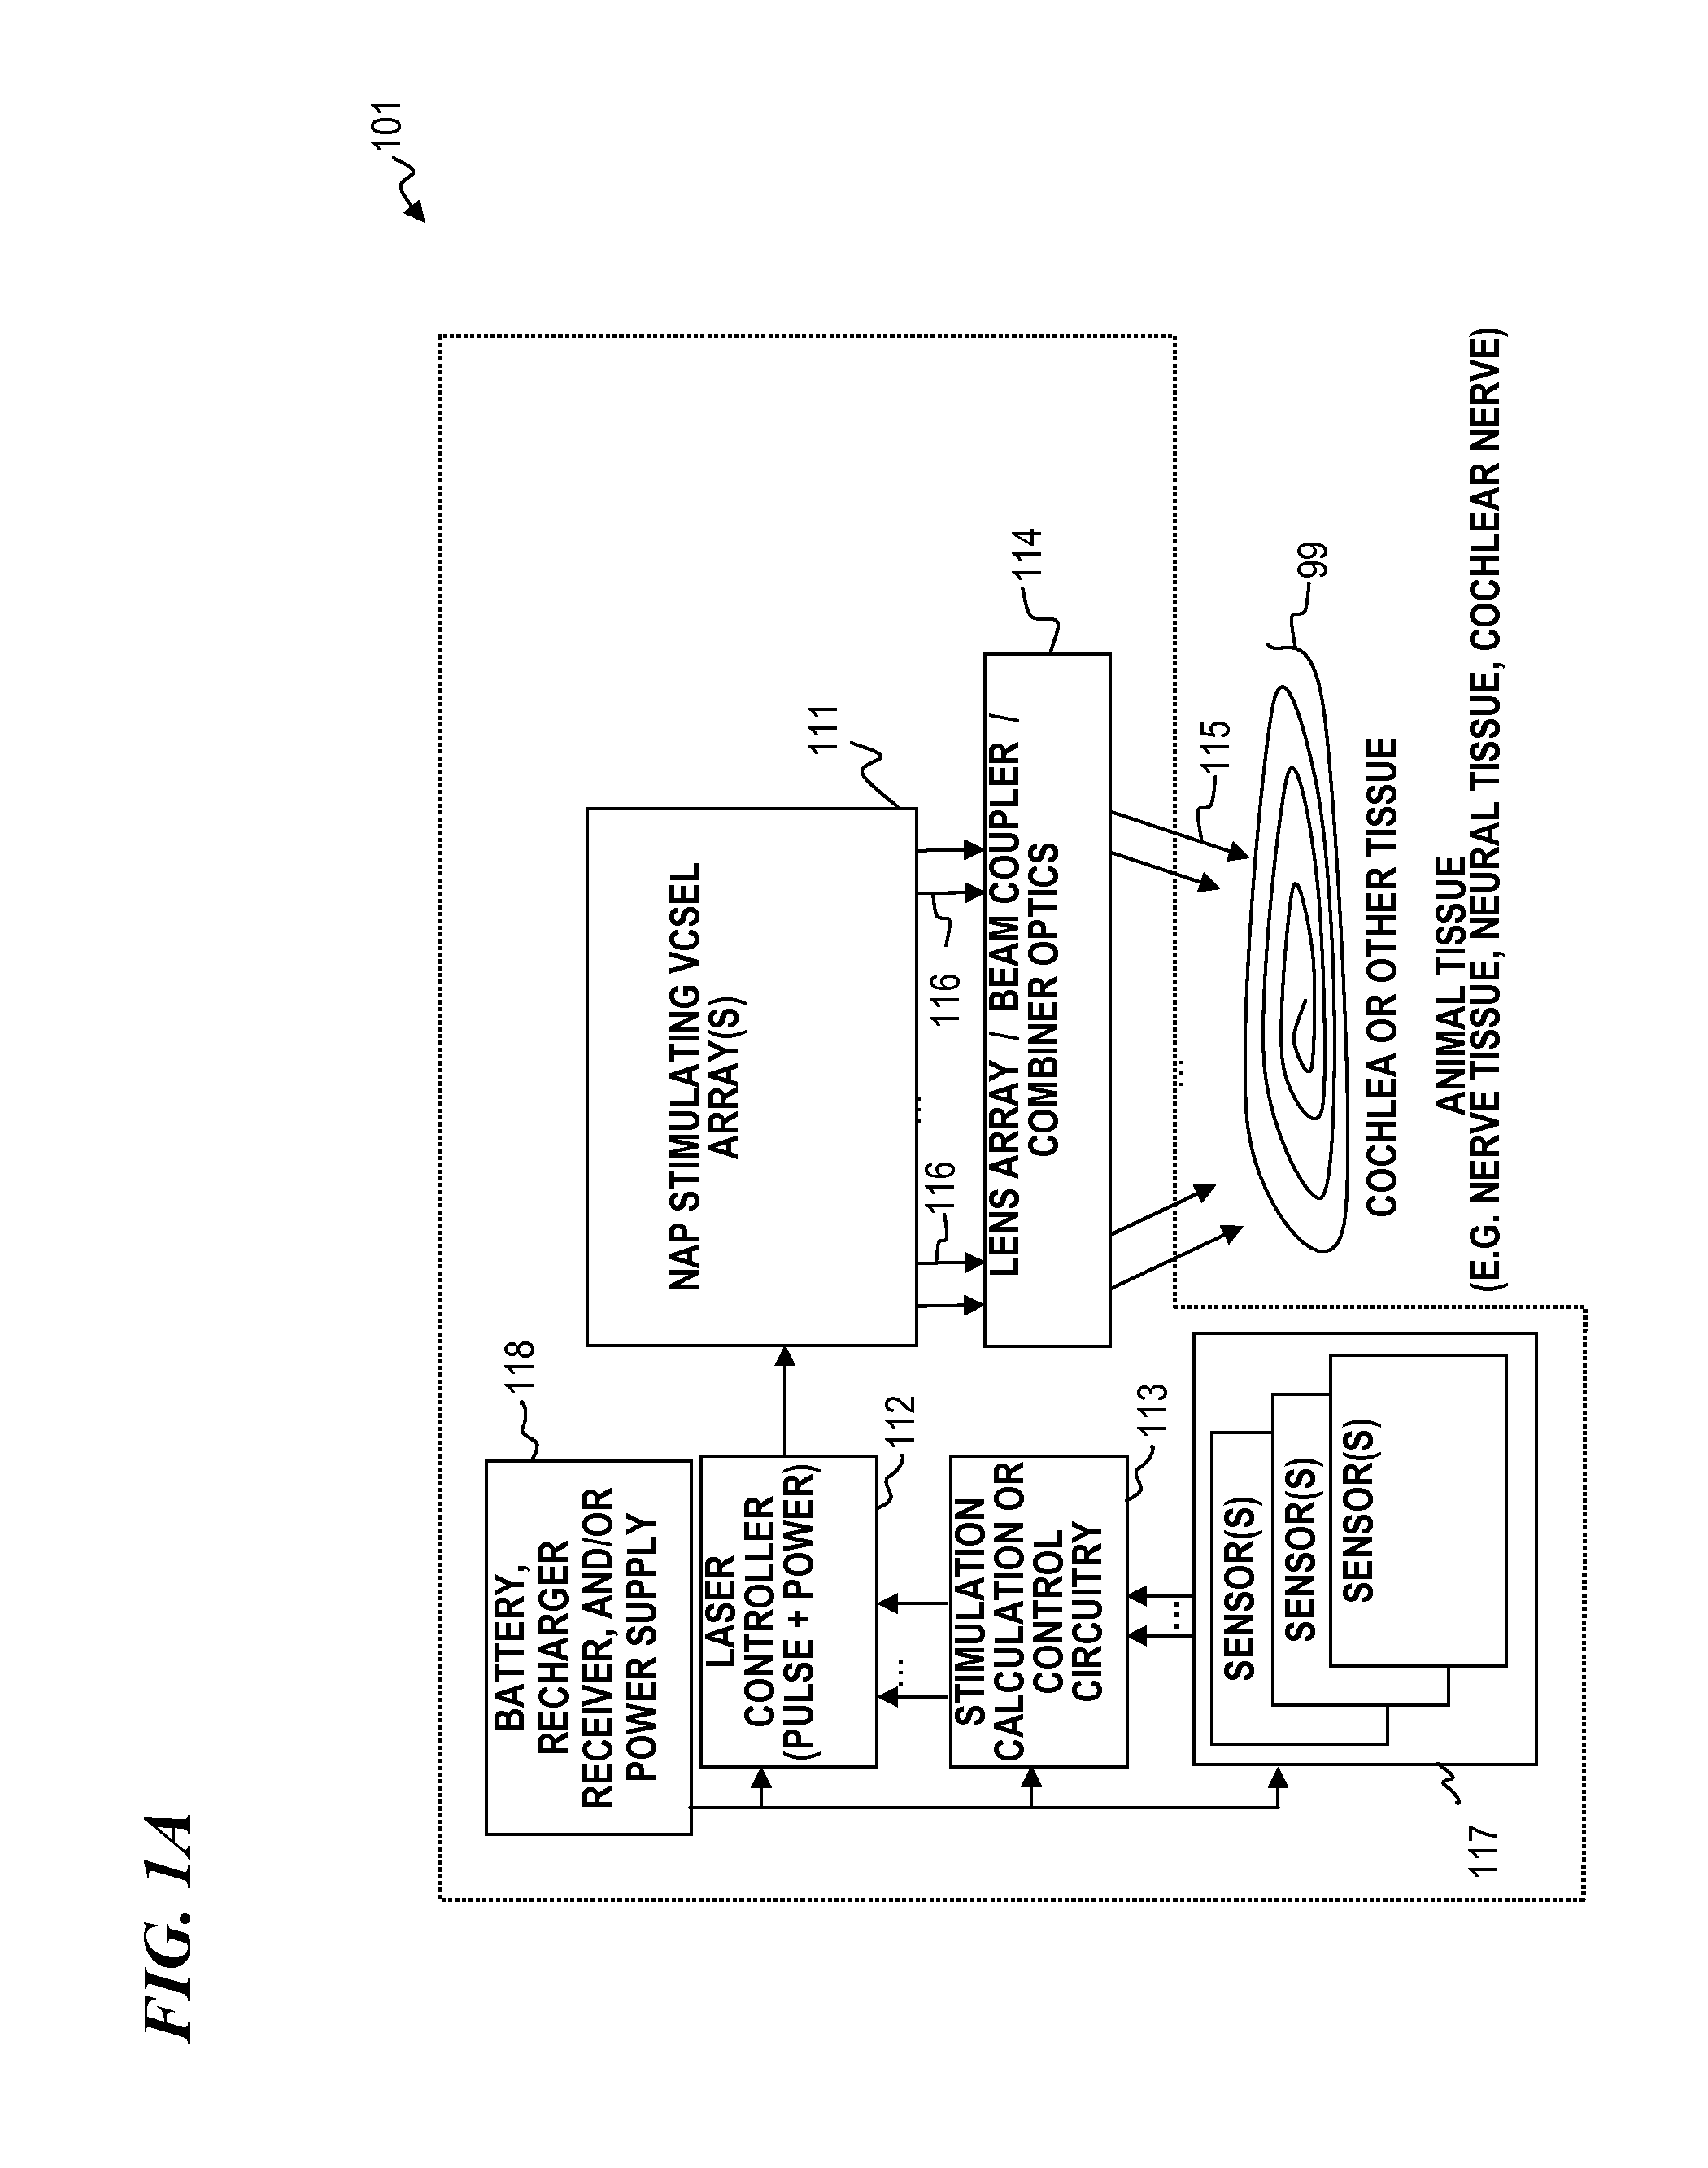 VCSEL array stimulator apparatus and method for light stimulation of bodily tissues